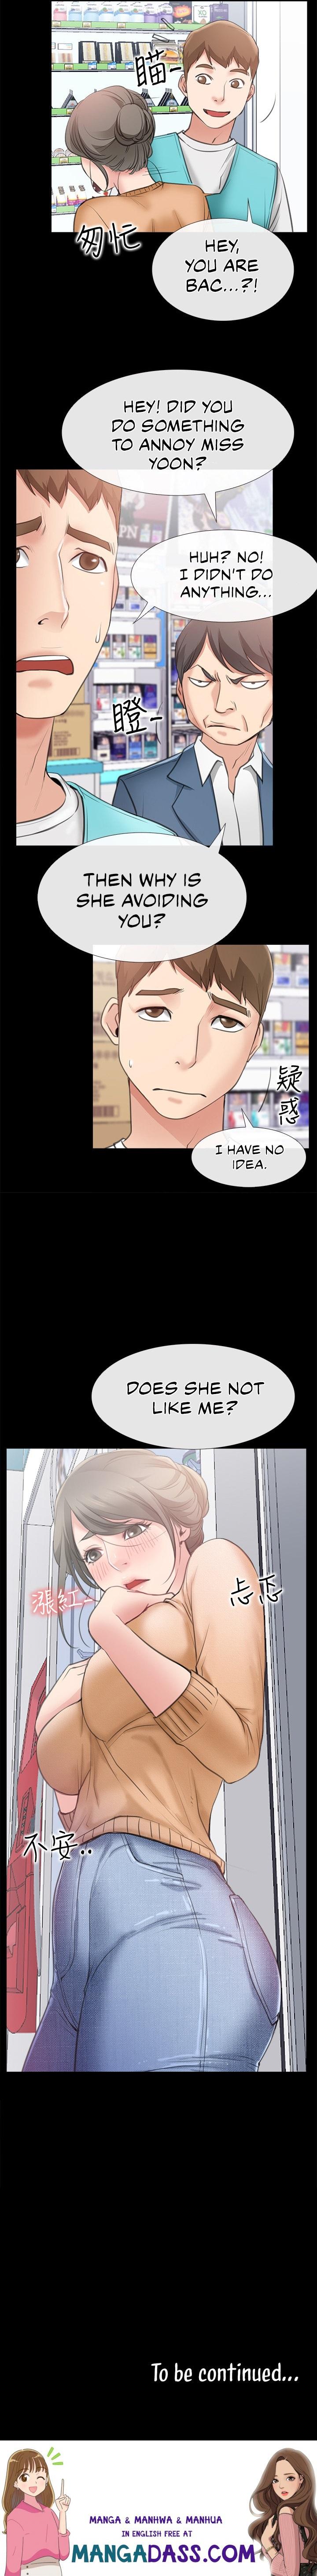 24 Hour Love - Chapter 11 Page 13